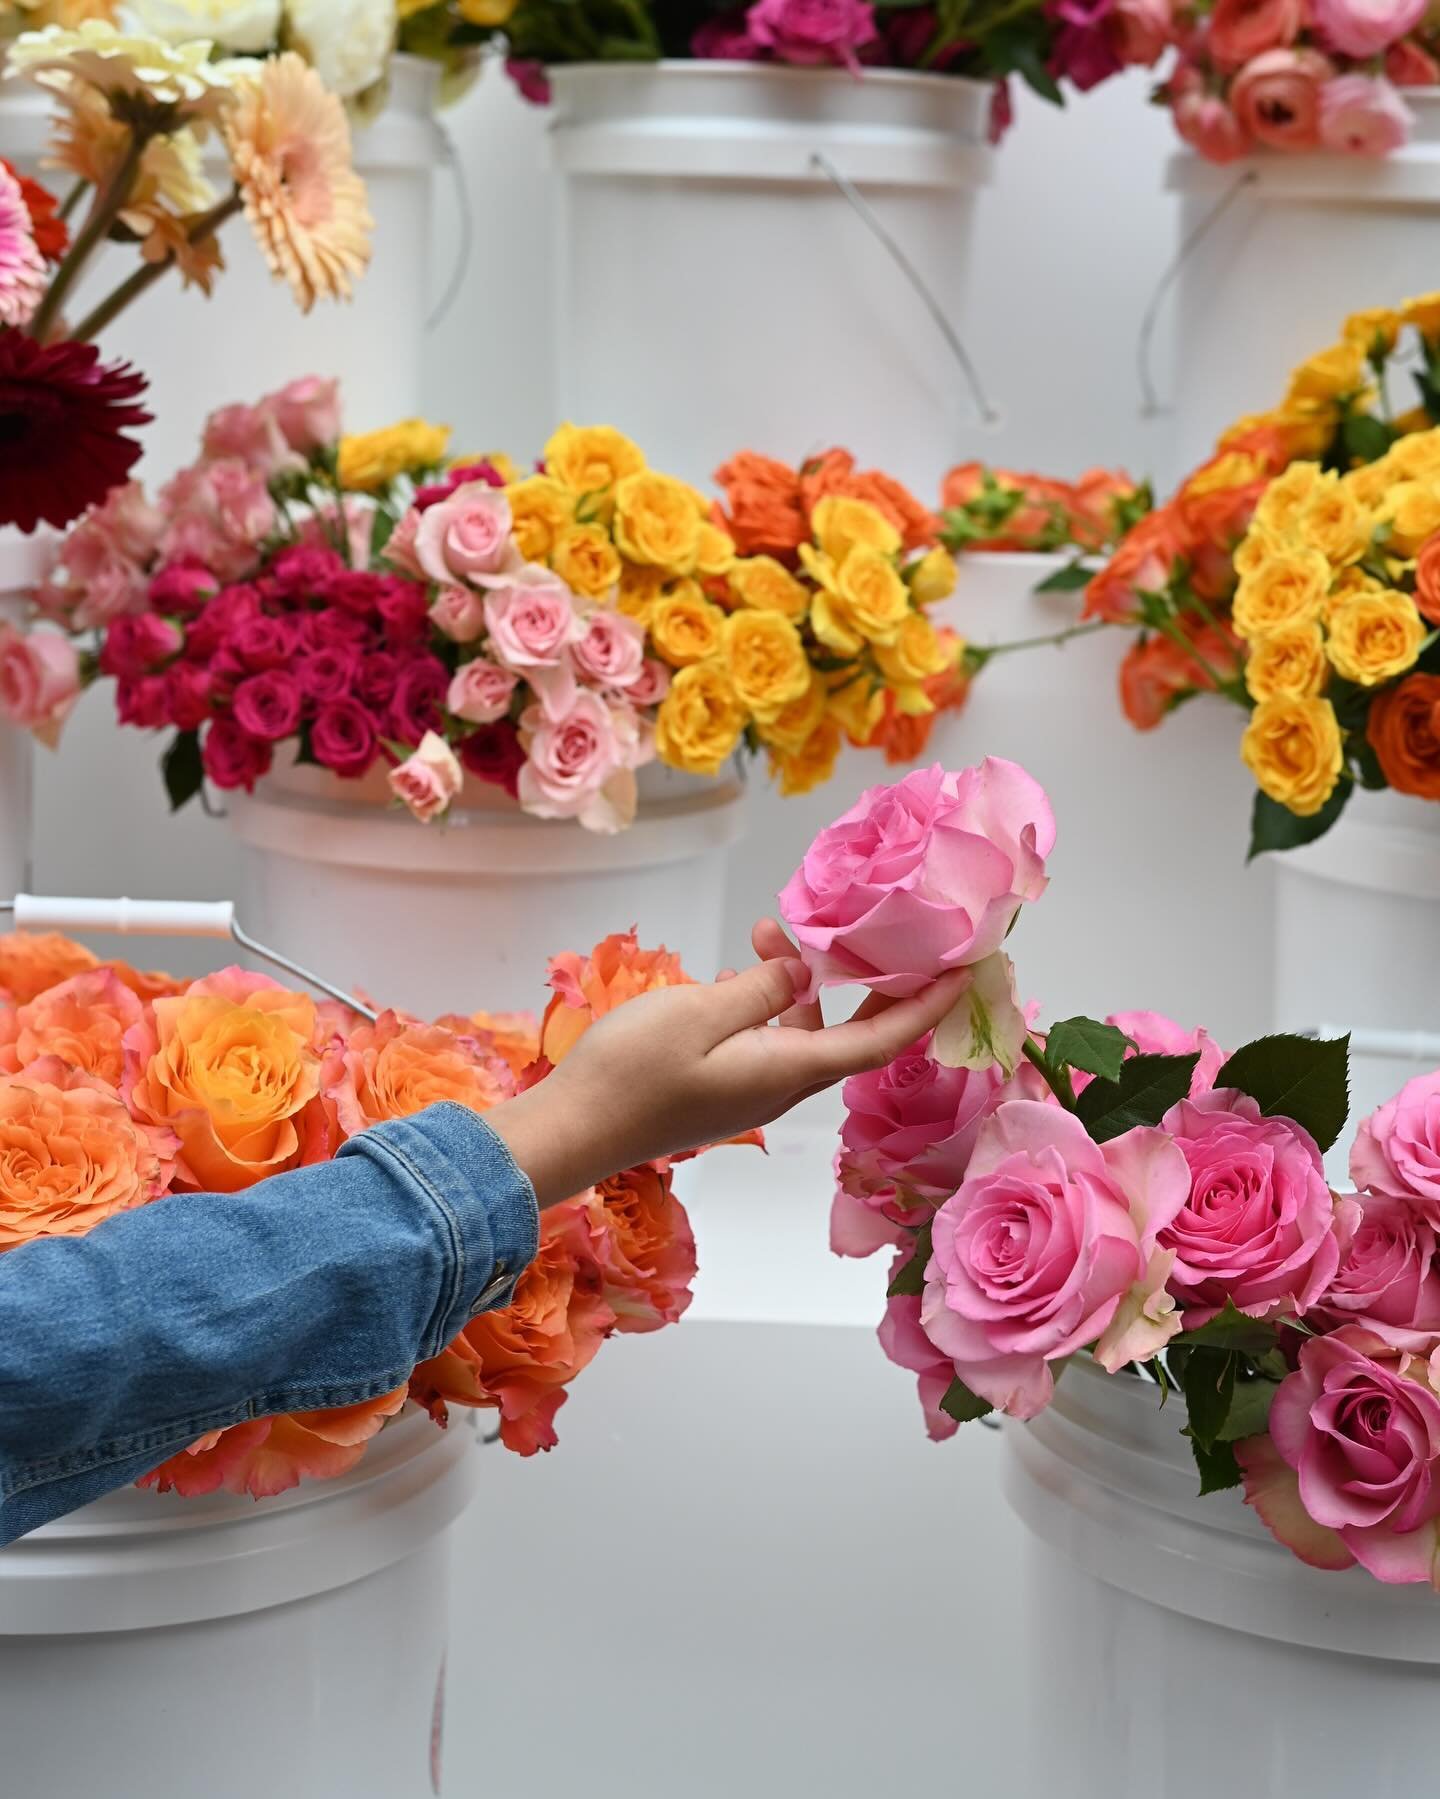 Floral Bar photo dump 🌸✨ we love seeing you guys pick out your fav flowers and sharing this experience with your loved ones!

-
-
-
-
-
#fineartflorist #flowerloversdaily #ihavethisthingforflowers #weddingfloraldesign #weddingflowerinspiration #enga